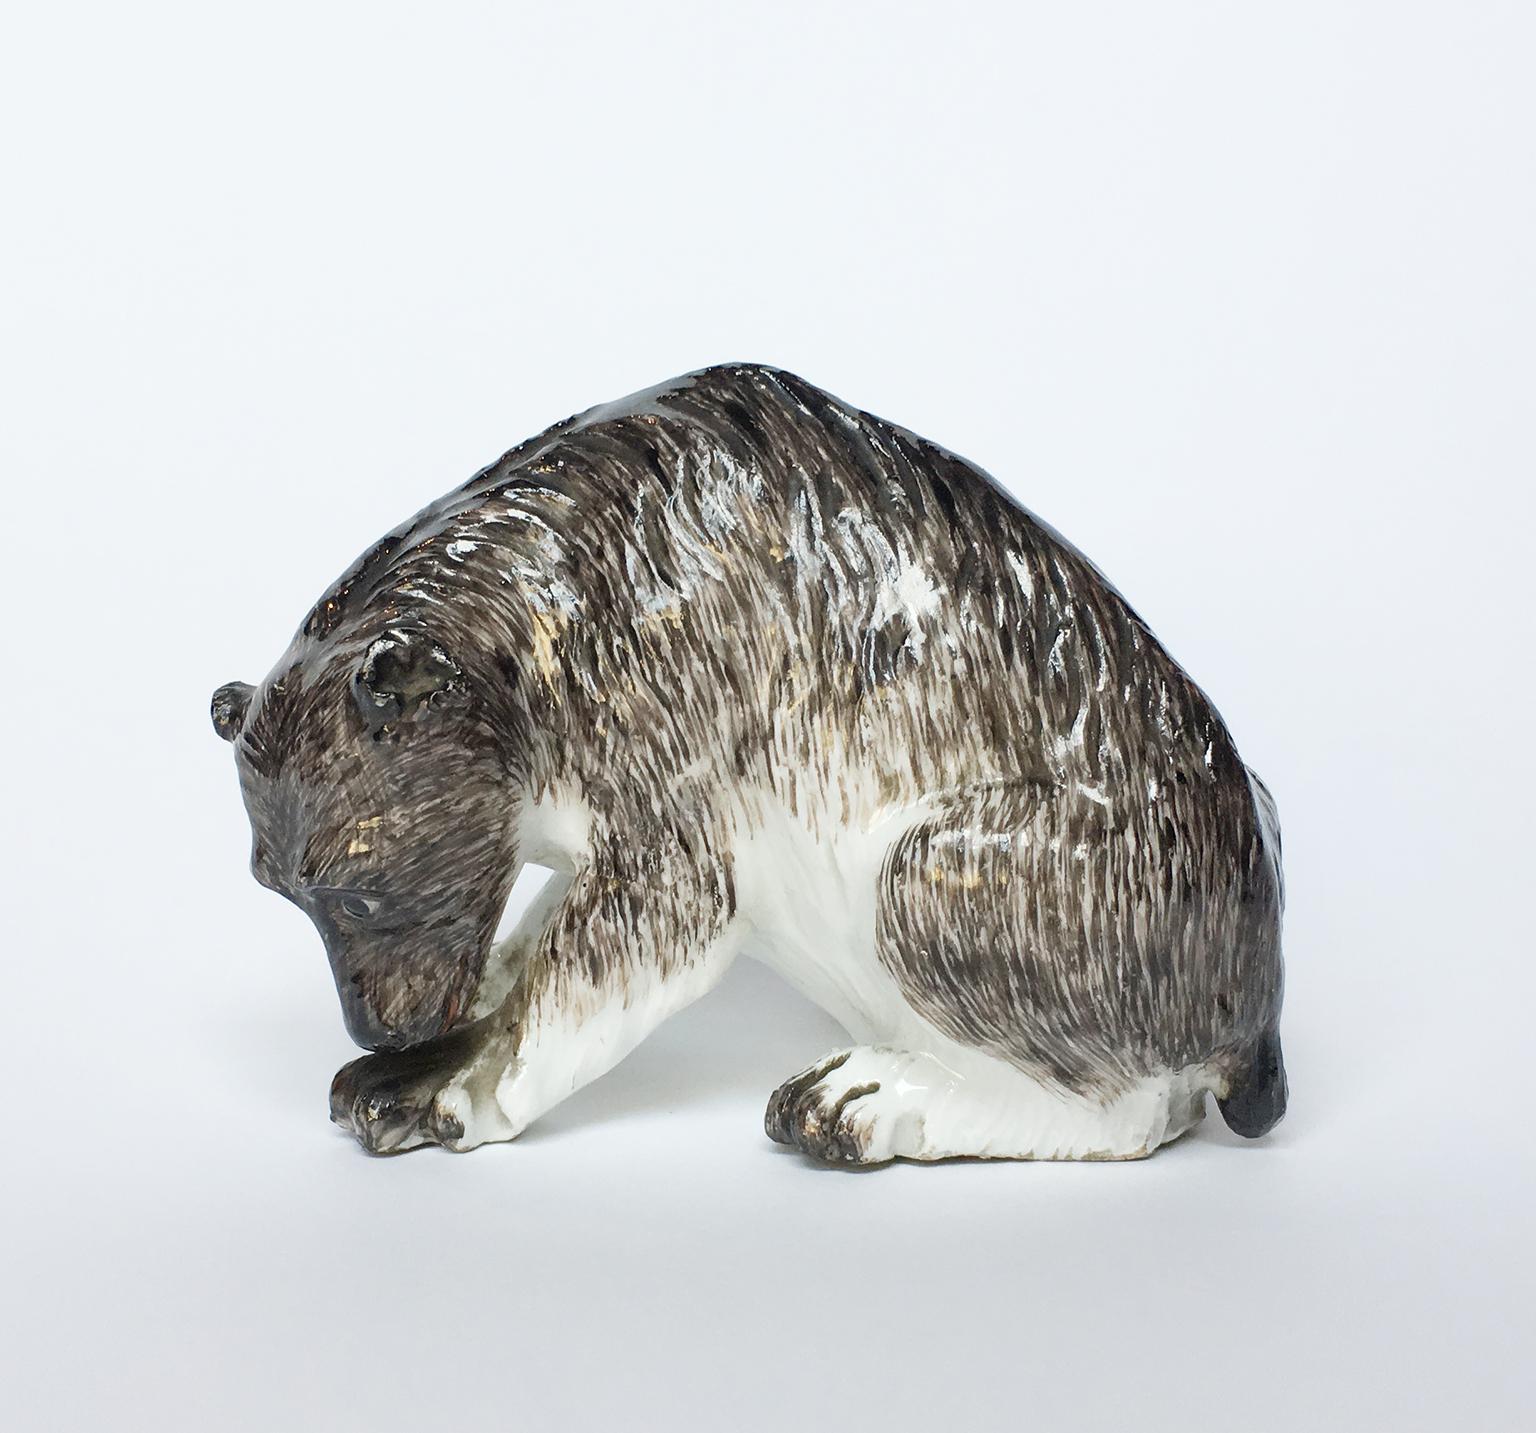 Hard porcelain bear modeled and painted in gray-brown and black
Manufacture of Meissen, by Johann Gottlieb Kirchner and Johan Joachim Kaendler, 1735
It measures 2.79 in x 3.81 in x 2.48 in (7.1 cm x 9.7 x 6.3 cm)
Weight: 0.465 lb (211 g)
State of